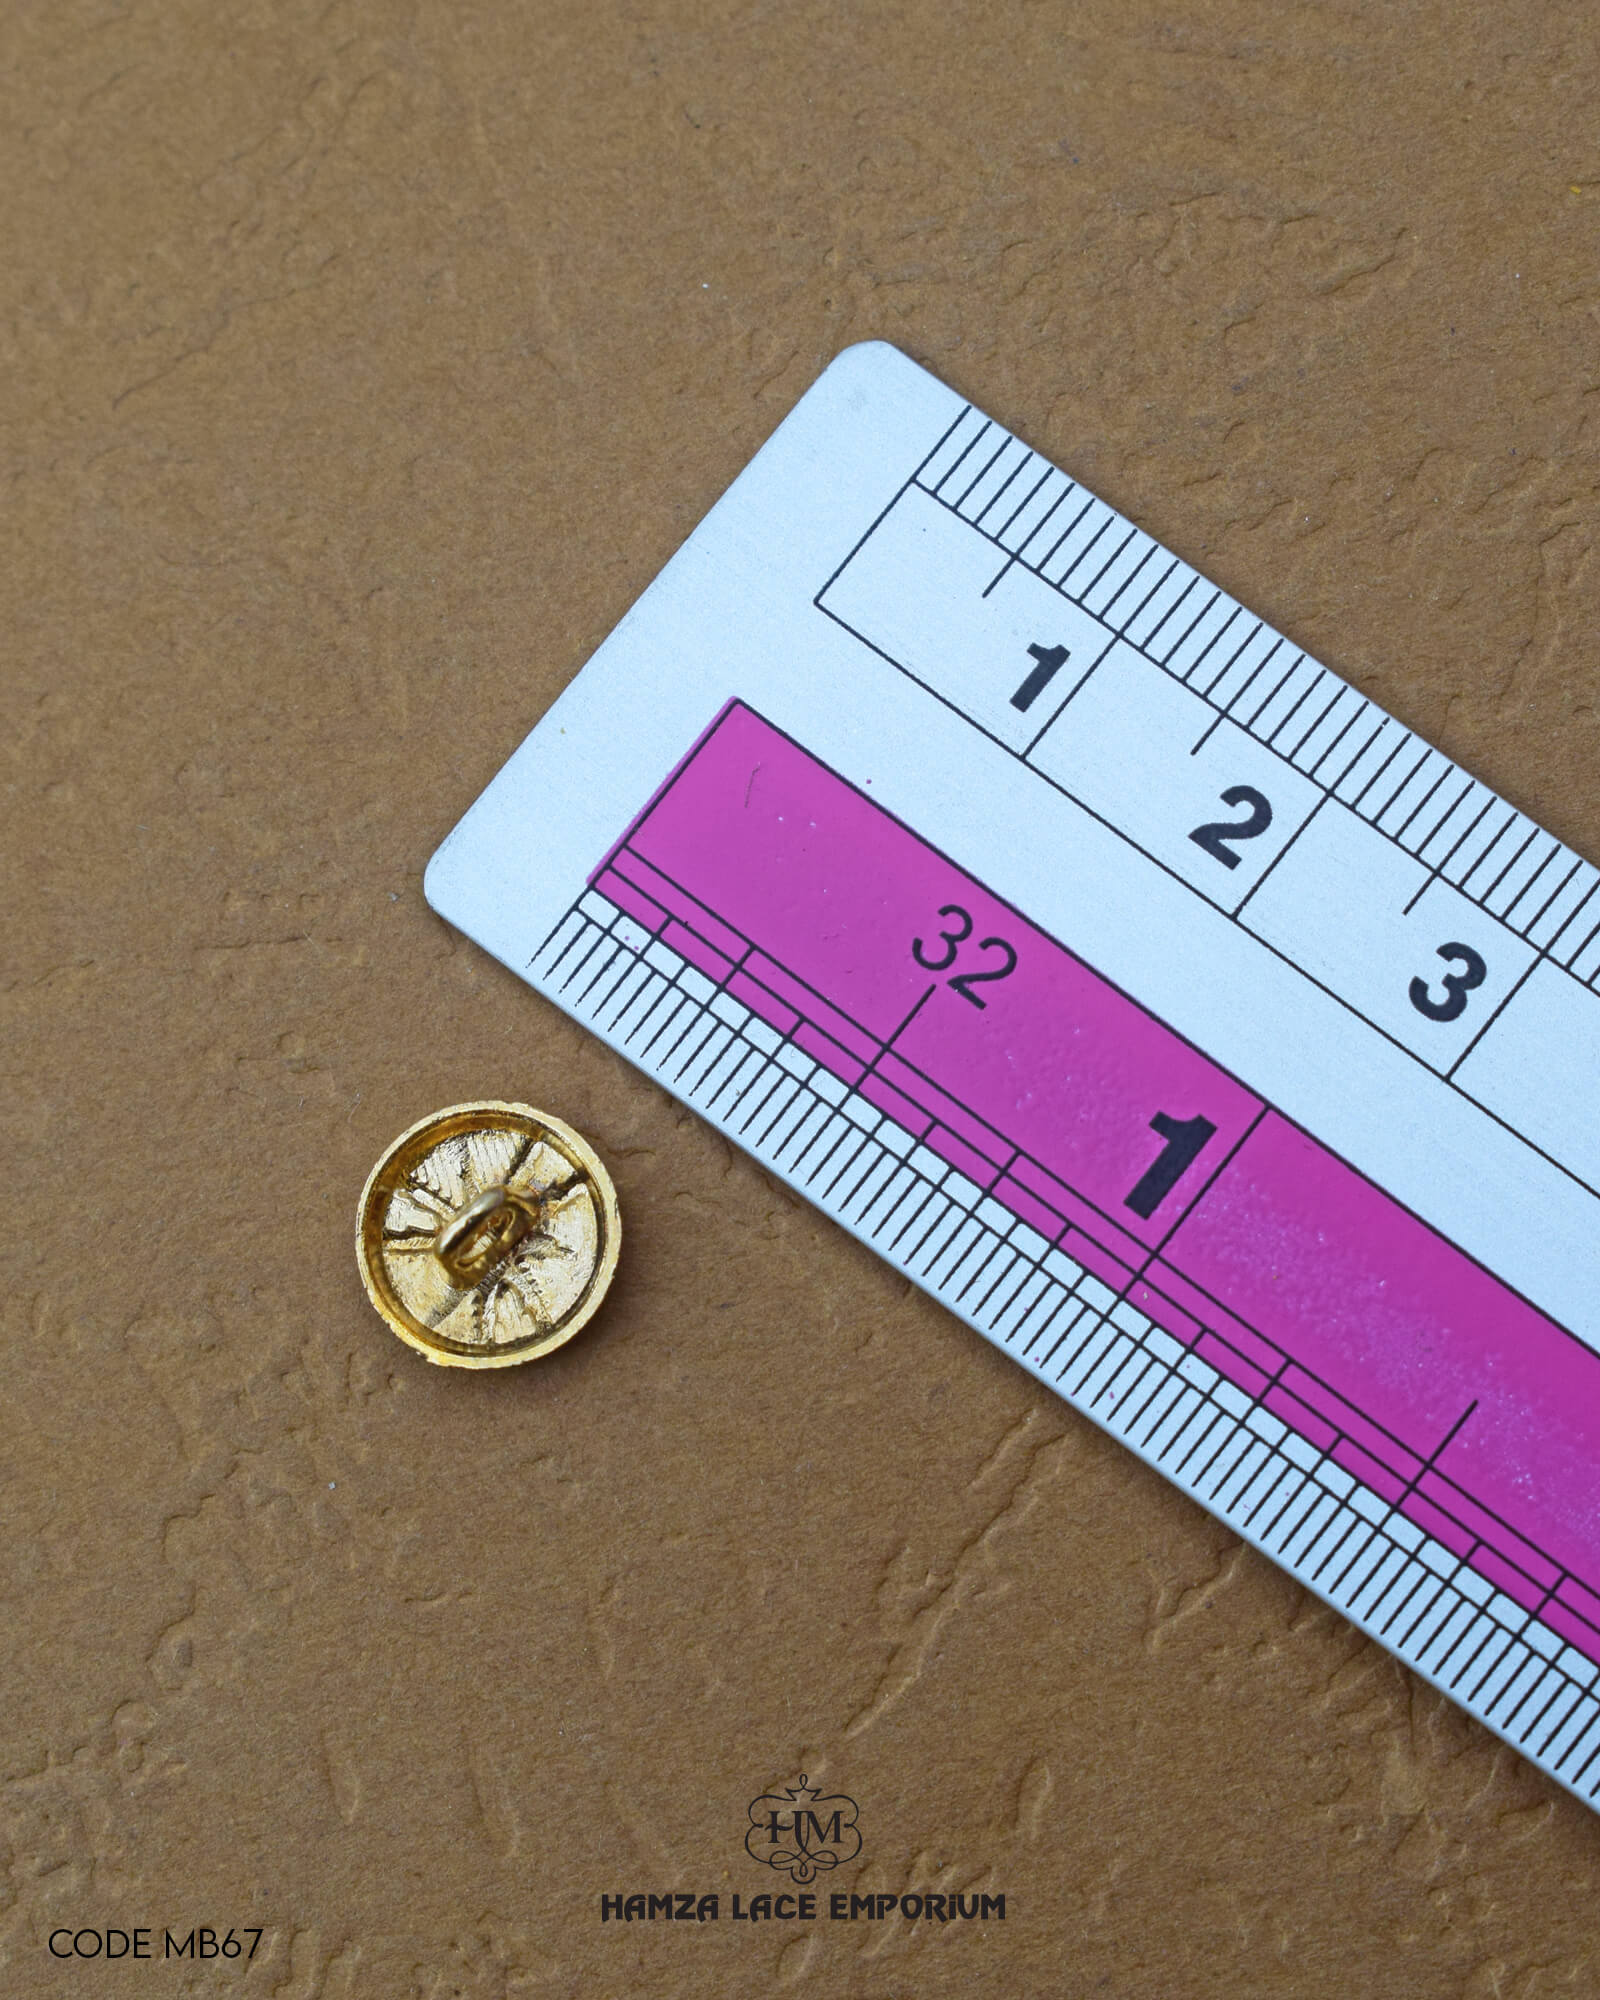 The size of the 'Golden Metal Button MB67' is measured by using a ruler